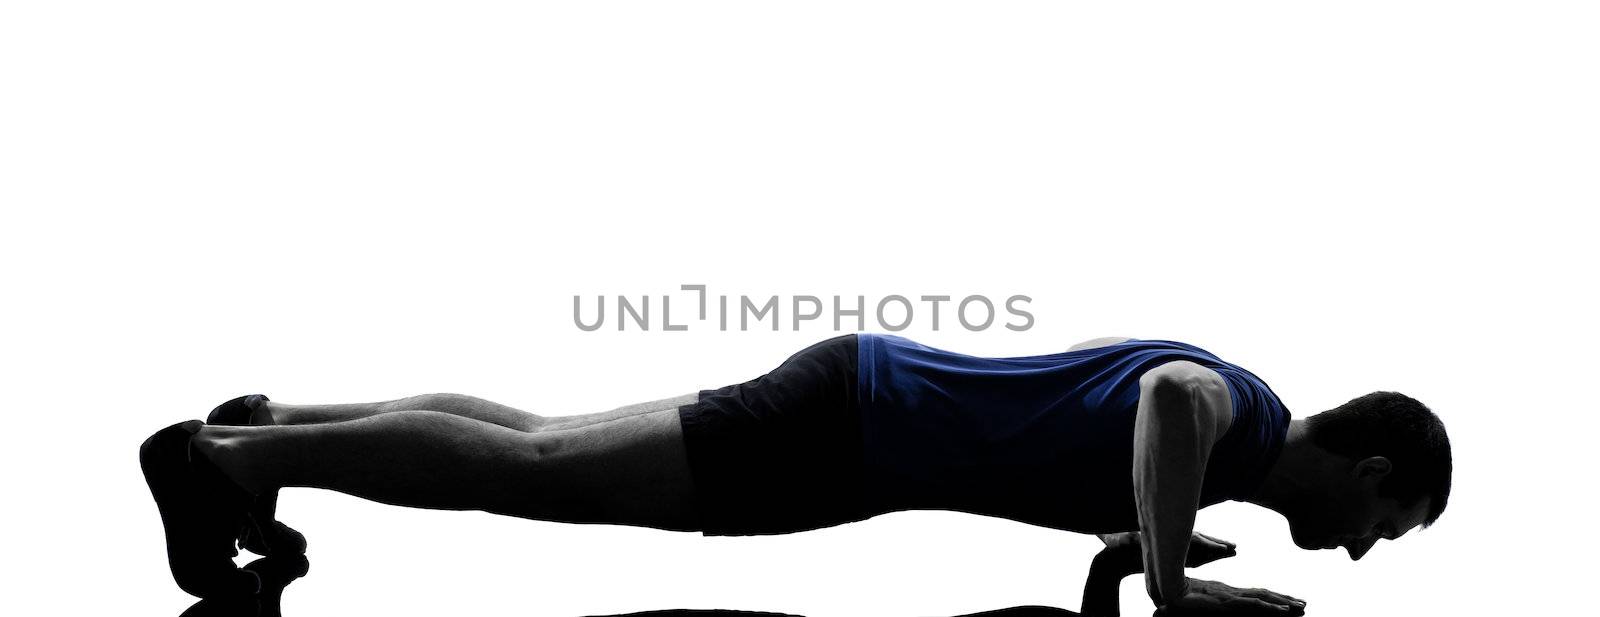 man exercising push ups workout fitness aerobics posture in silhouette studio isolated on white background